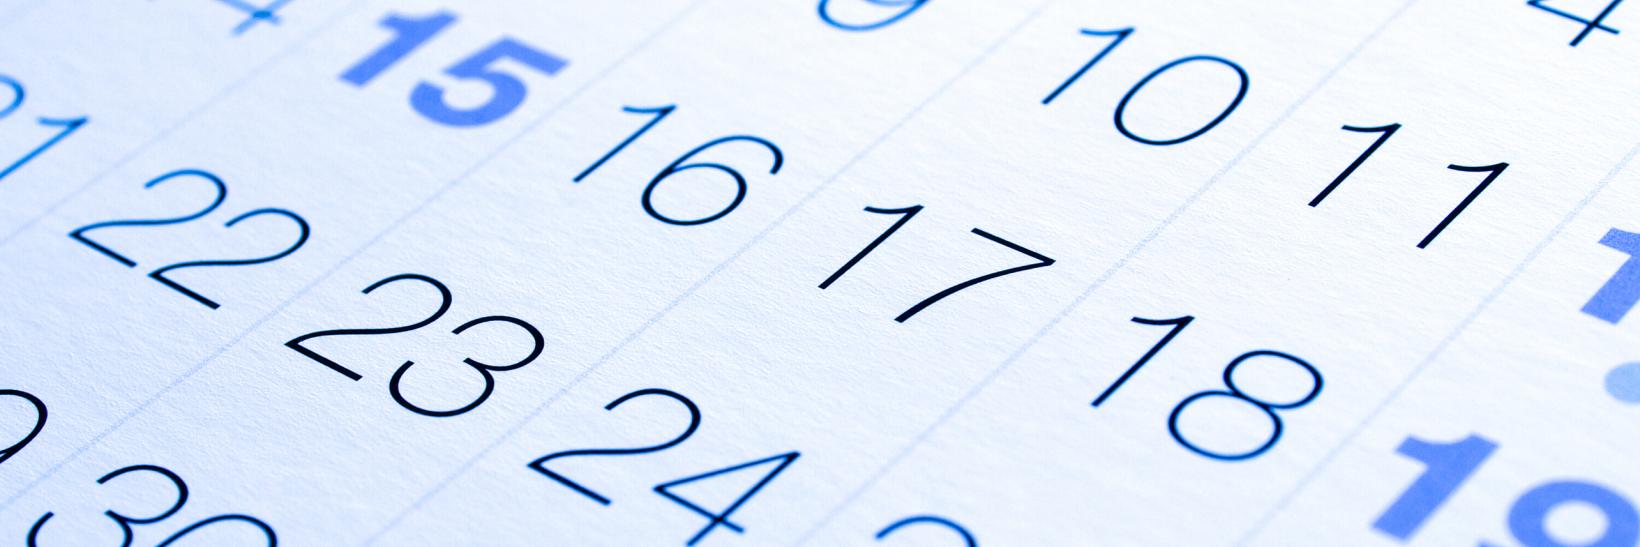 Find out what to do if you need to defer your acceptance to a later date on the calendar.